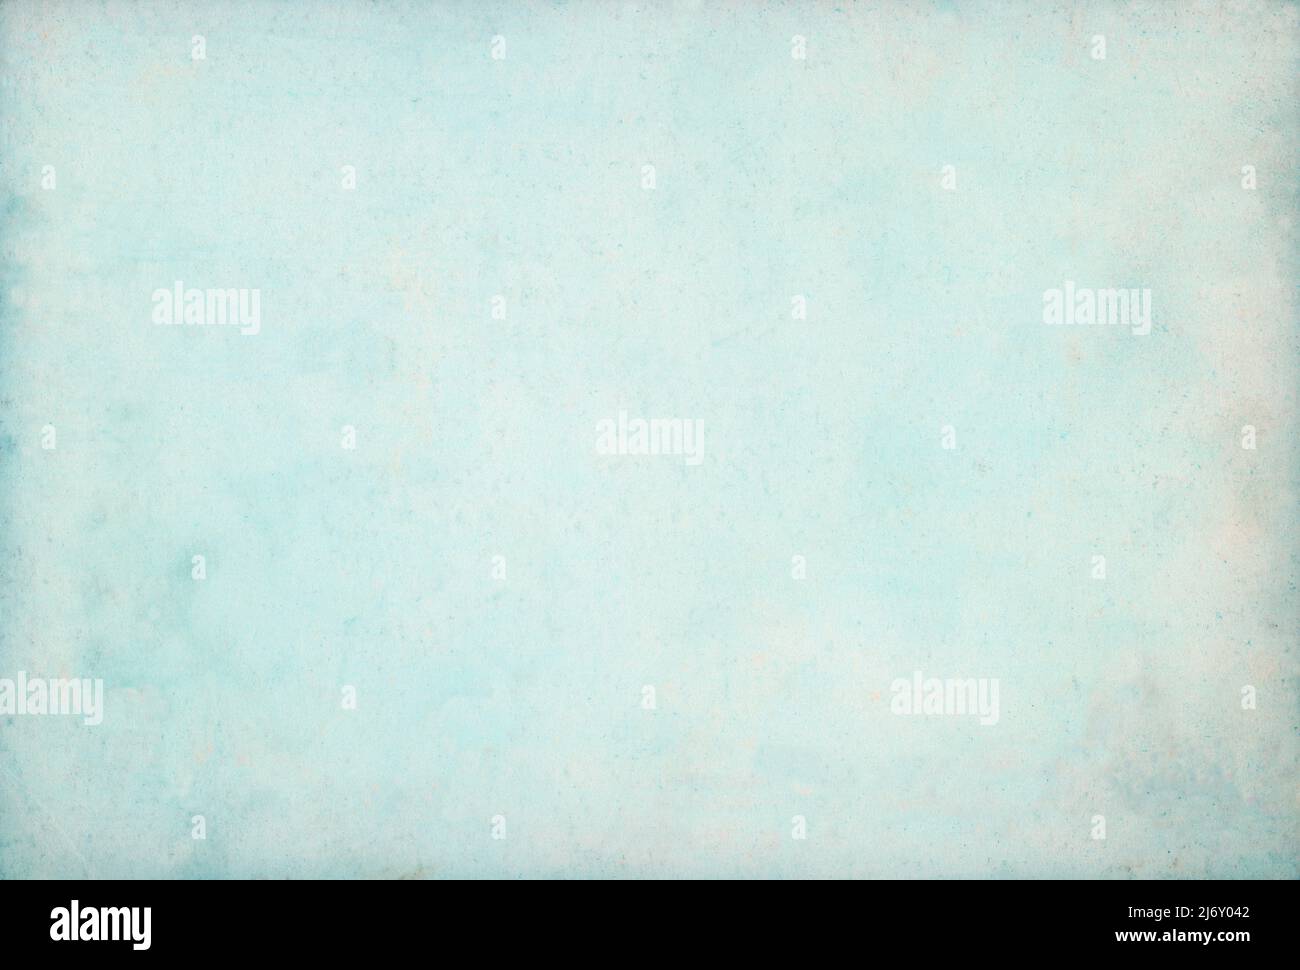 Blue paper texture background Stock Photo